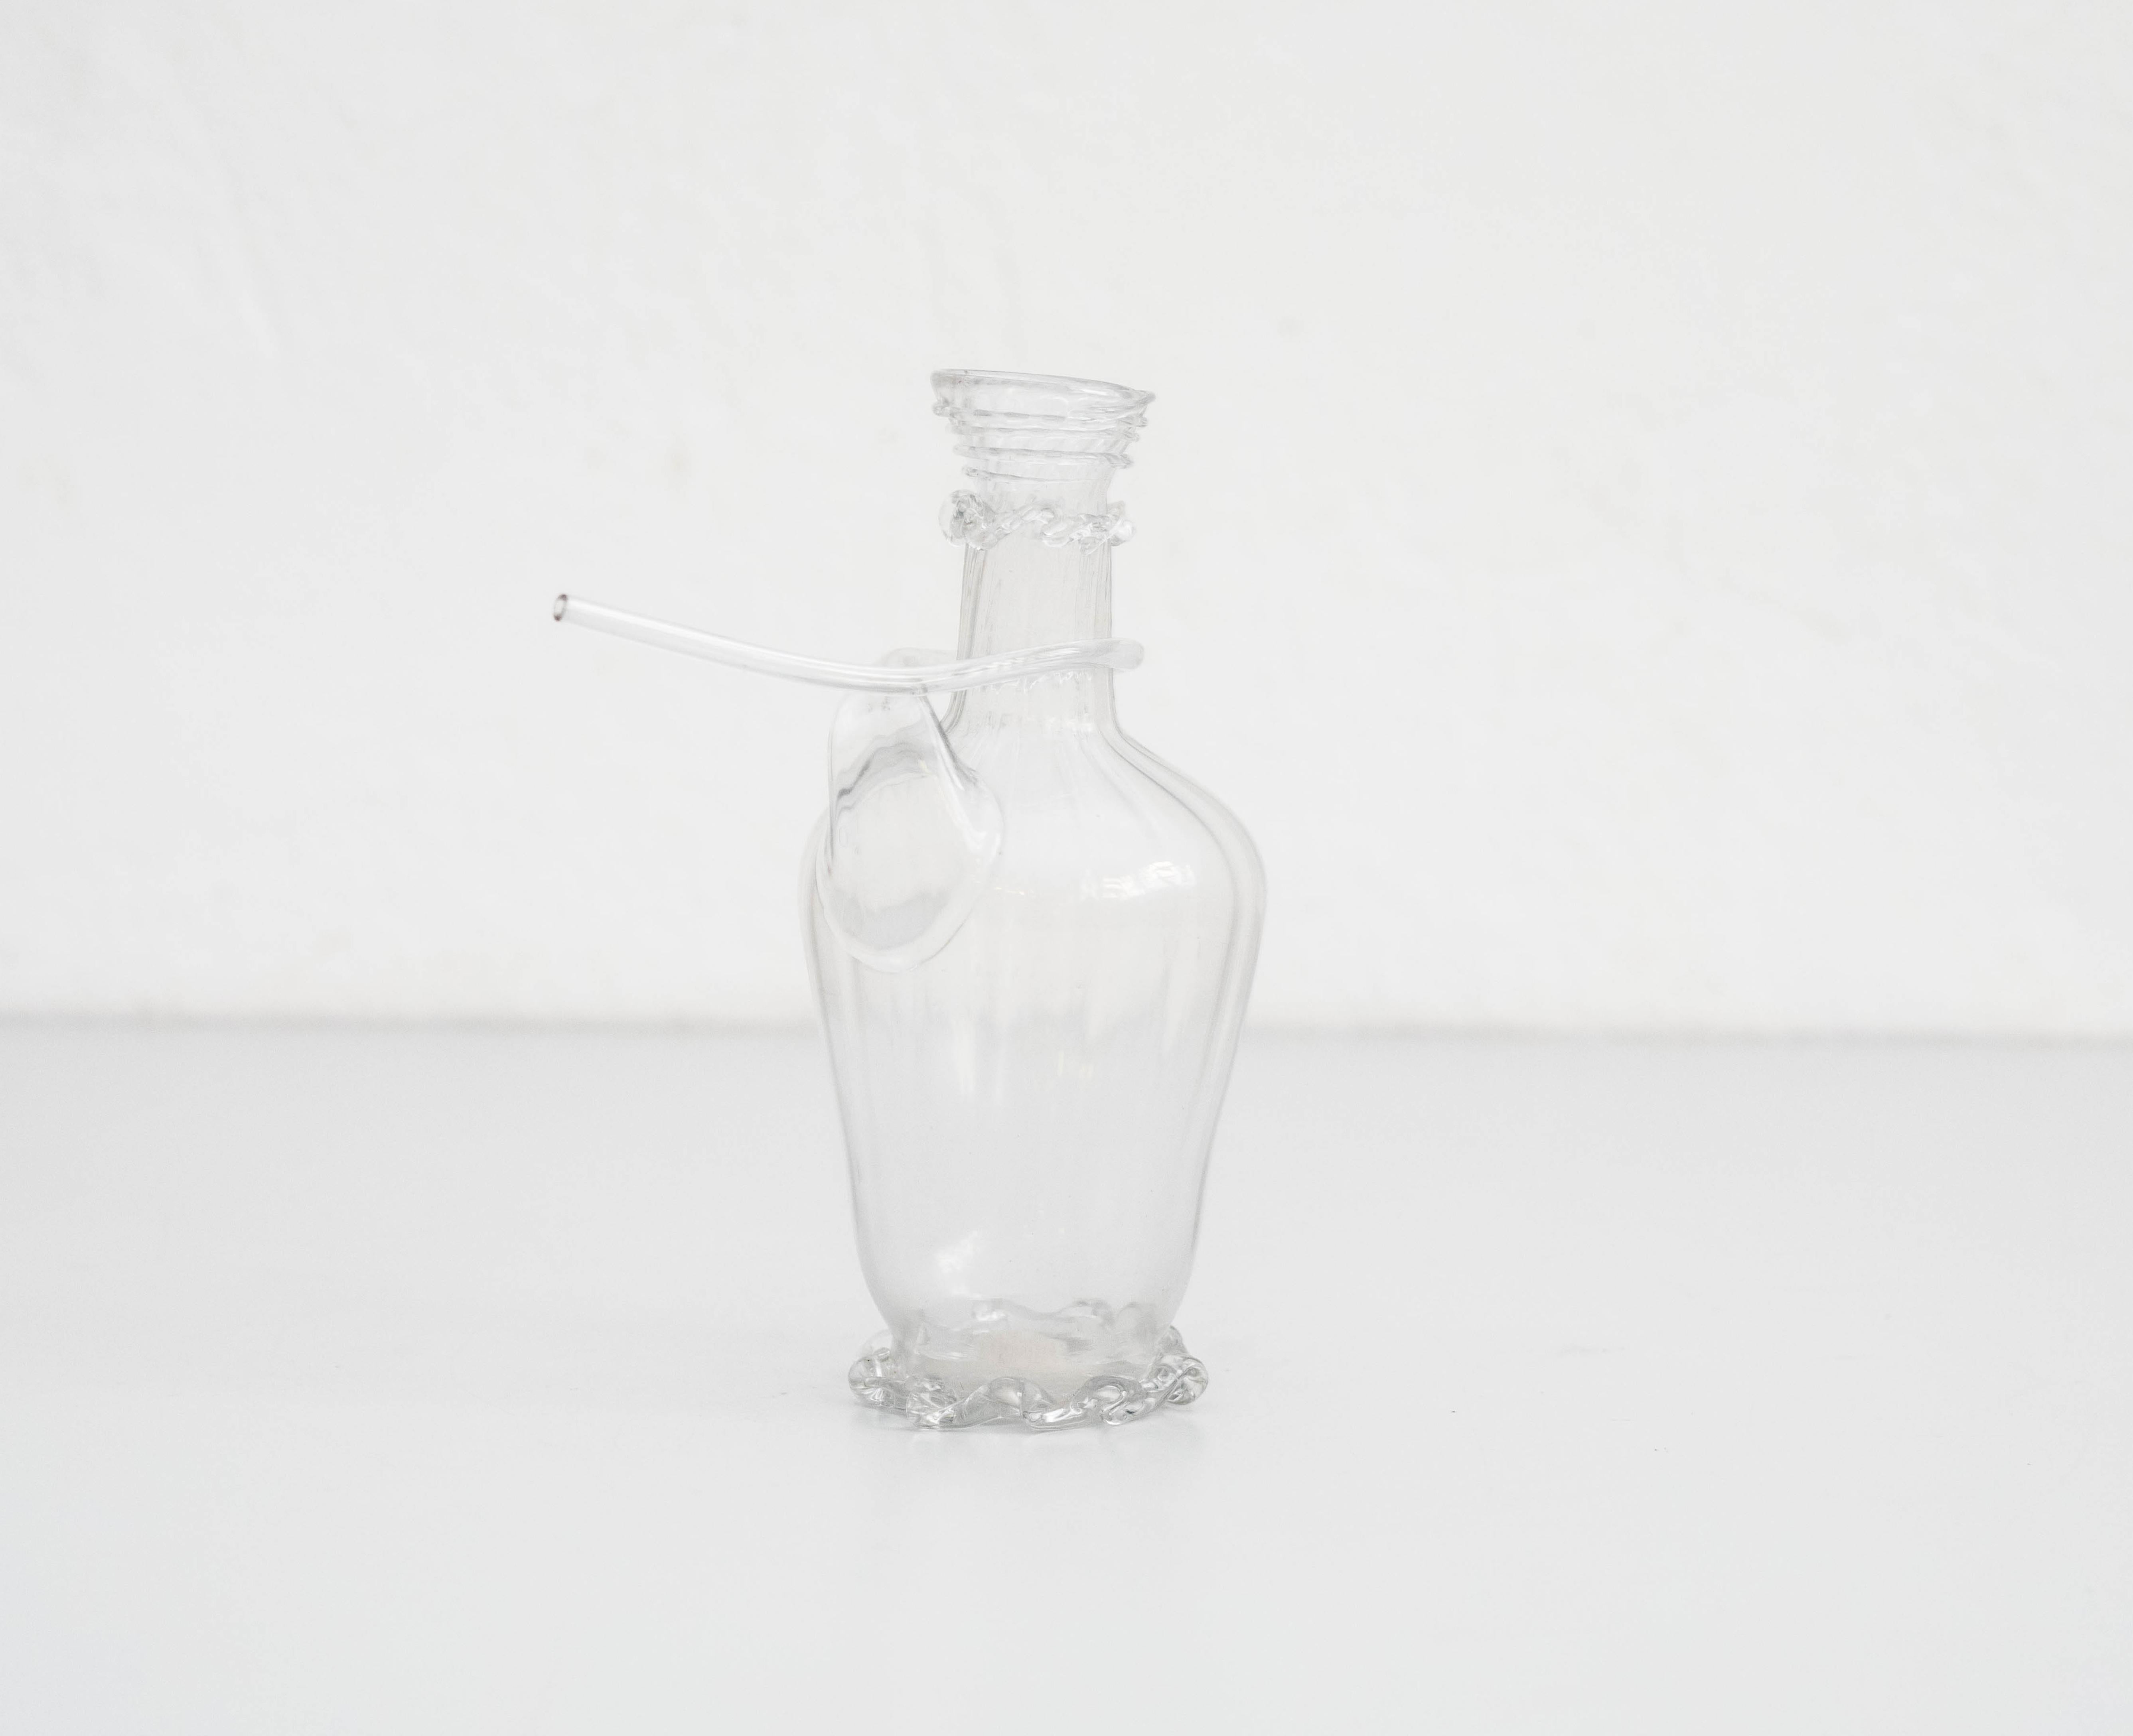 Glass jug, circa 1930 
Manufactured in Spain.

In original condition, with minor wear consistent of age and use, preserving a beautiful patina.

Material:
Glass

Dimensions:
 D 9 cm
 W 16 cm
 H 20 cm

 